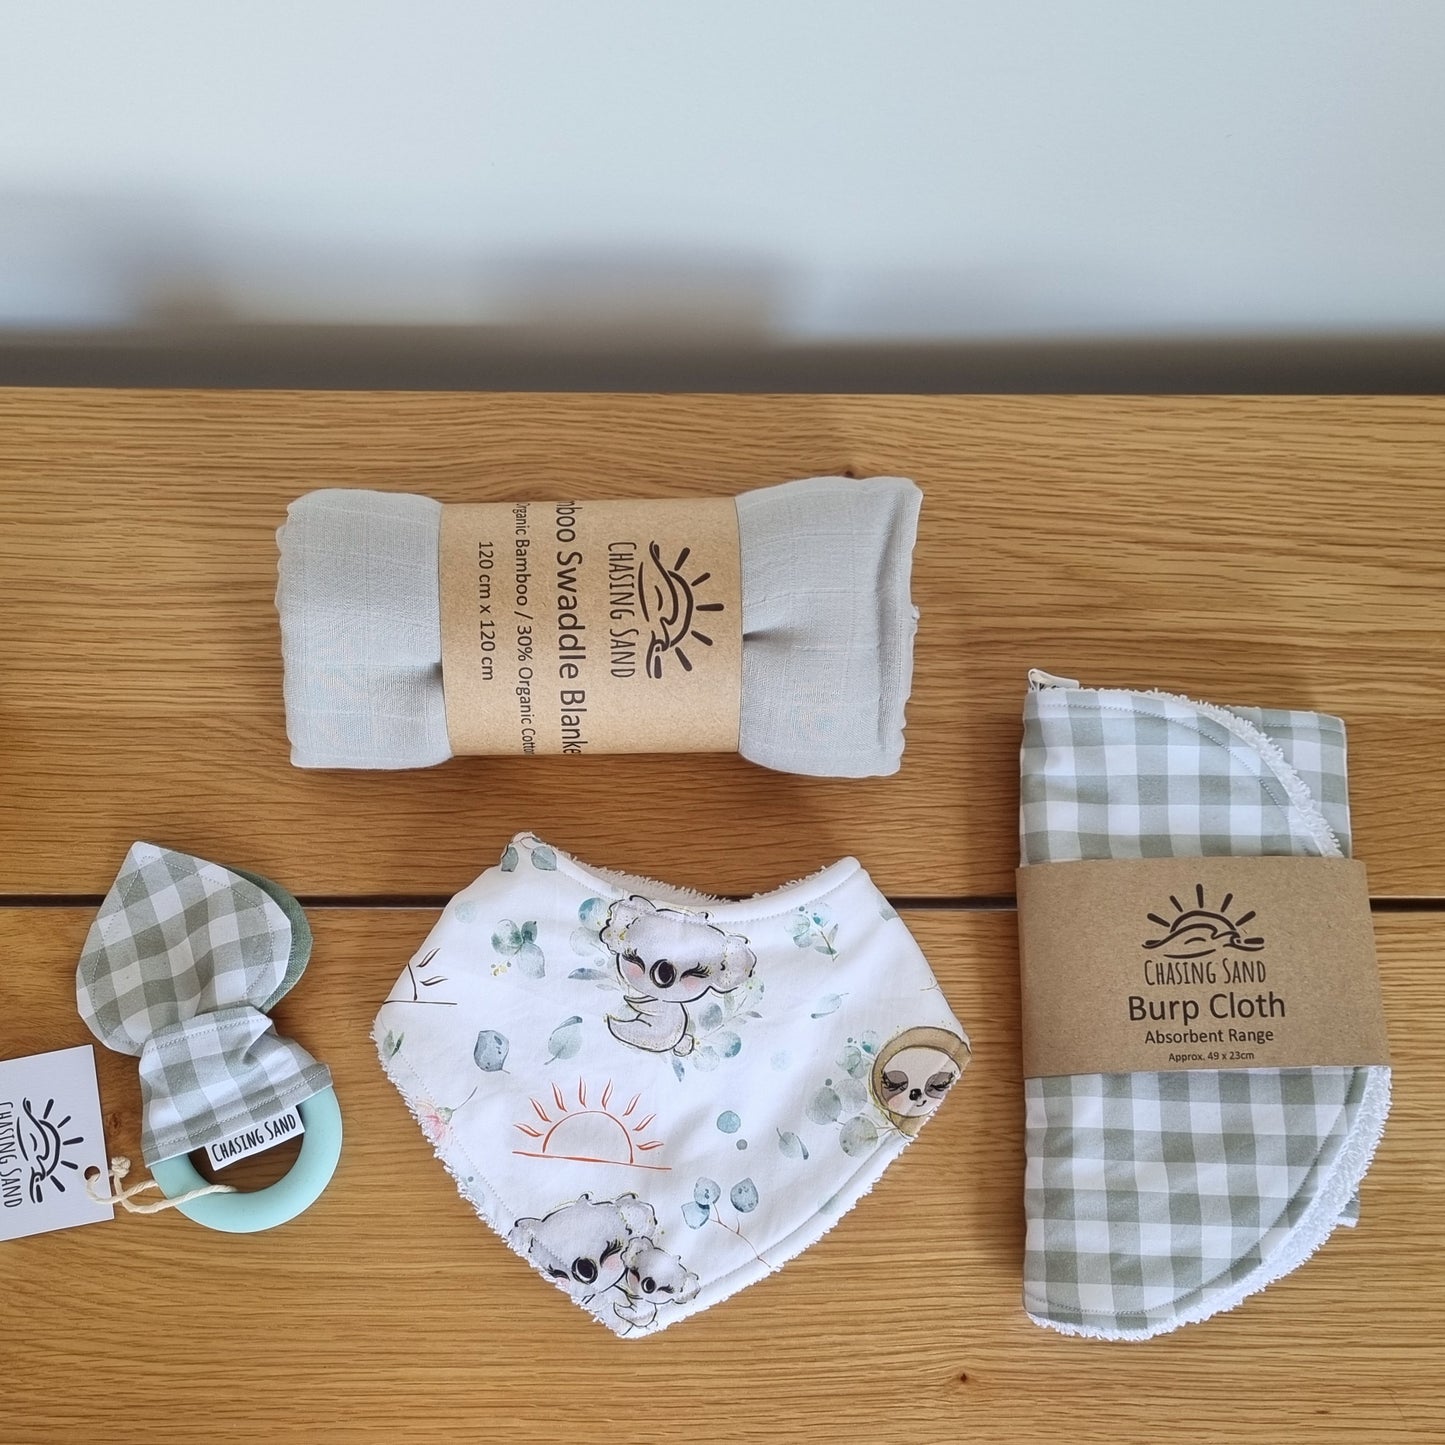 For Baby Gift Box - Neutral against wooden/white backdrop. Each Gift Box contains 1x Swaddle Blanket, 1x Burp Cloth, 1x Dribble Bib and 1x Teether.